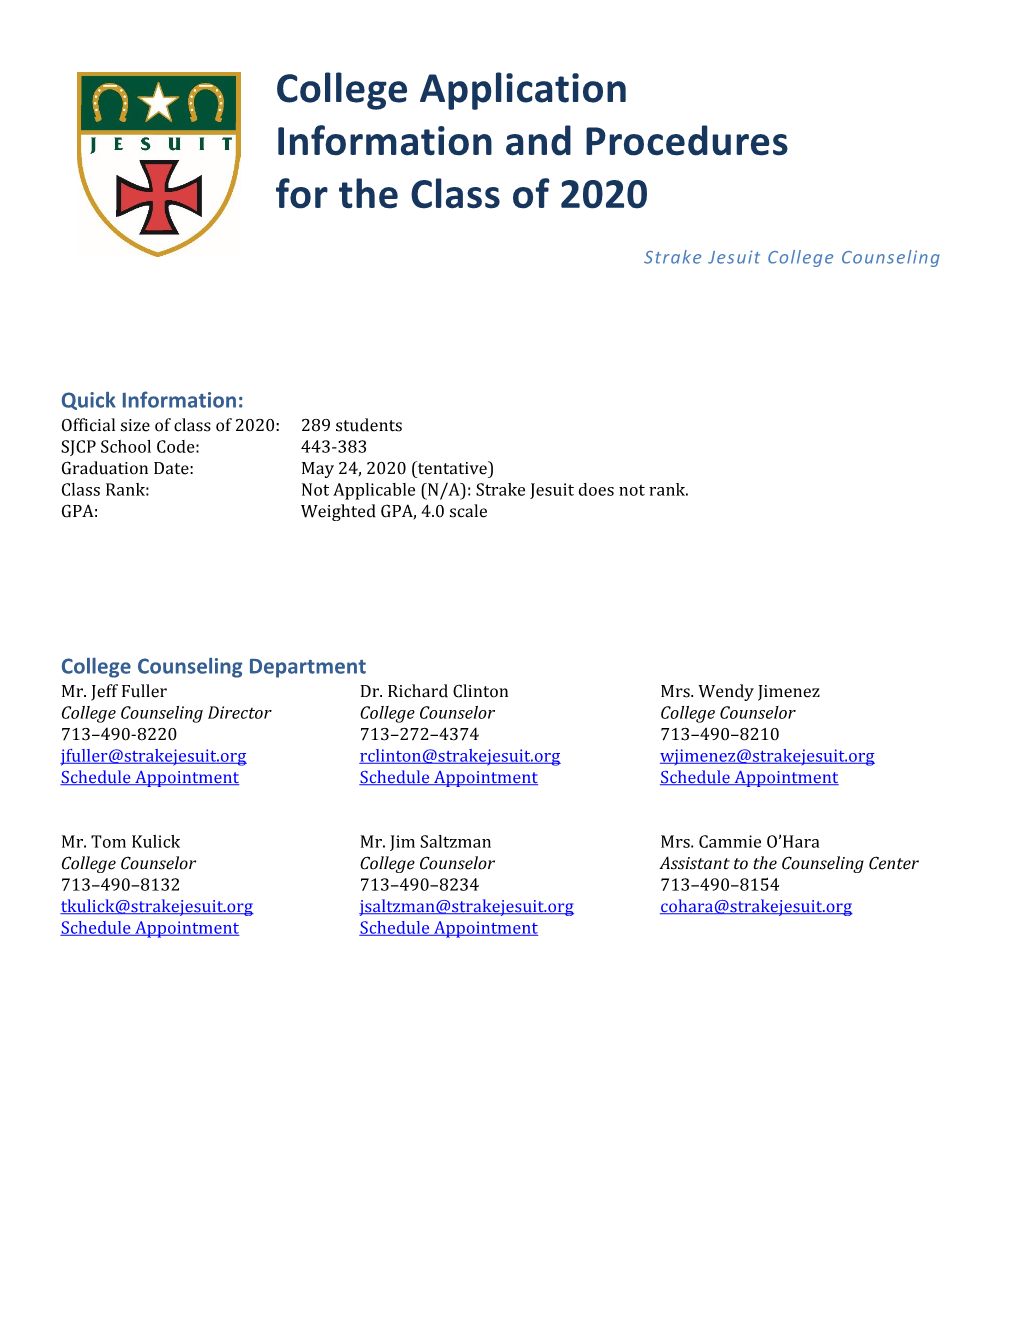 Official Size of Class of 2020: 289 Students